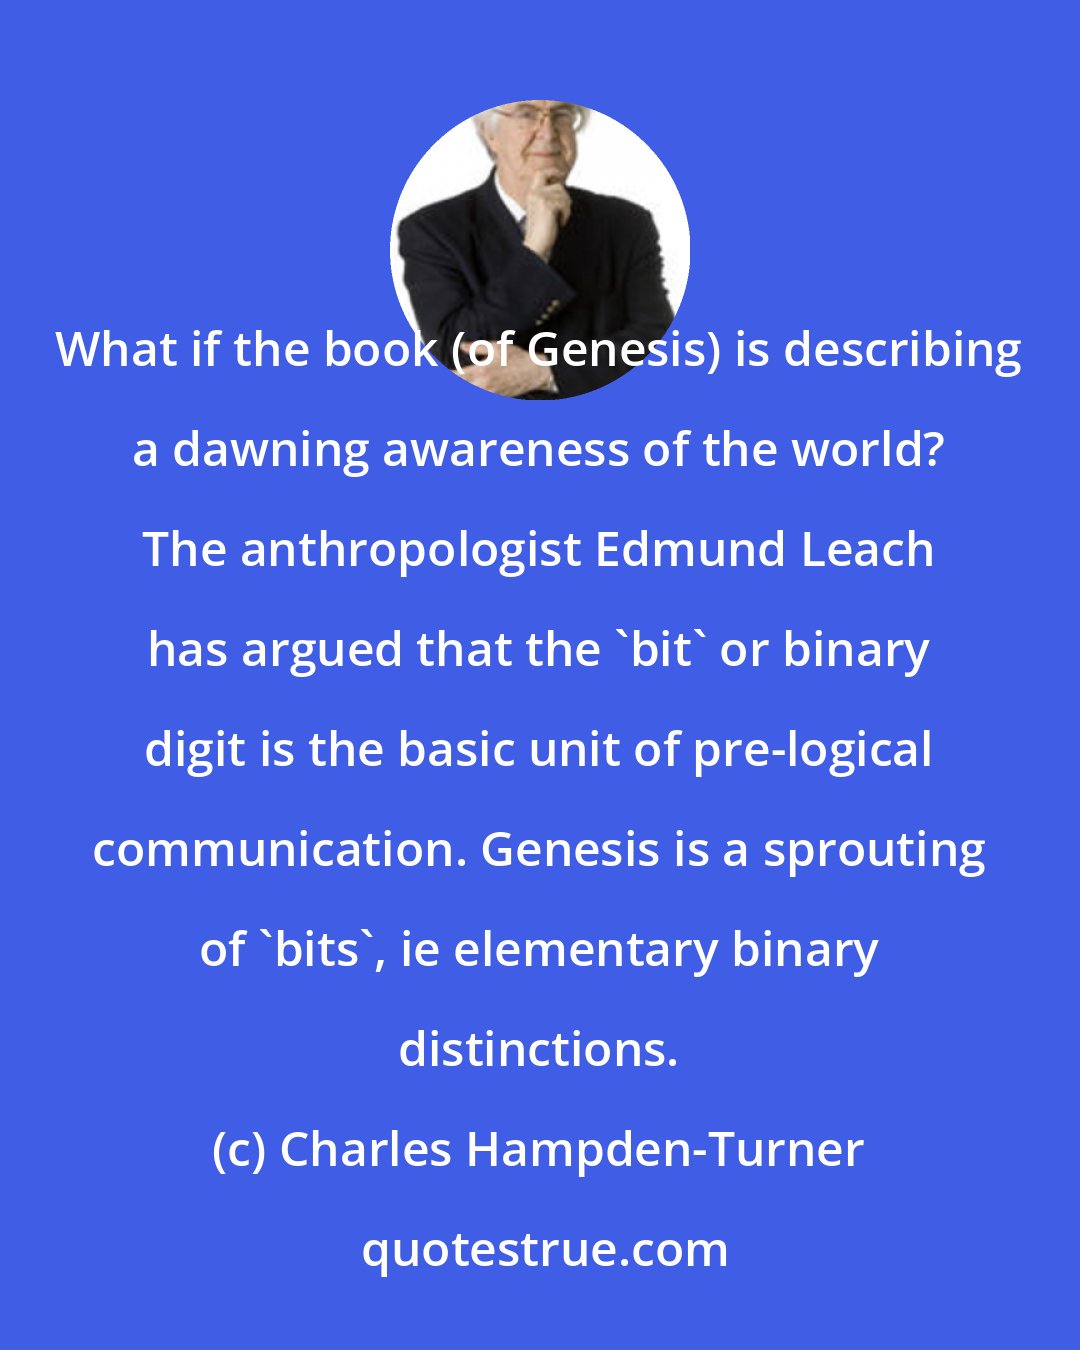 Charles Hampden-Turner: What if the book (of Genesis) is describing a dawning awareness of the world? The anthropologist Edmund Leach has argued that the 'bit' or binary digit is the basic unit of pre-logical communication. Genesis is a sprouting of 'bits', ie elementary binary distinctions.